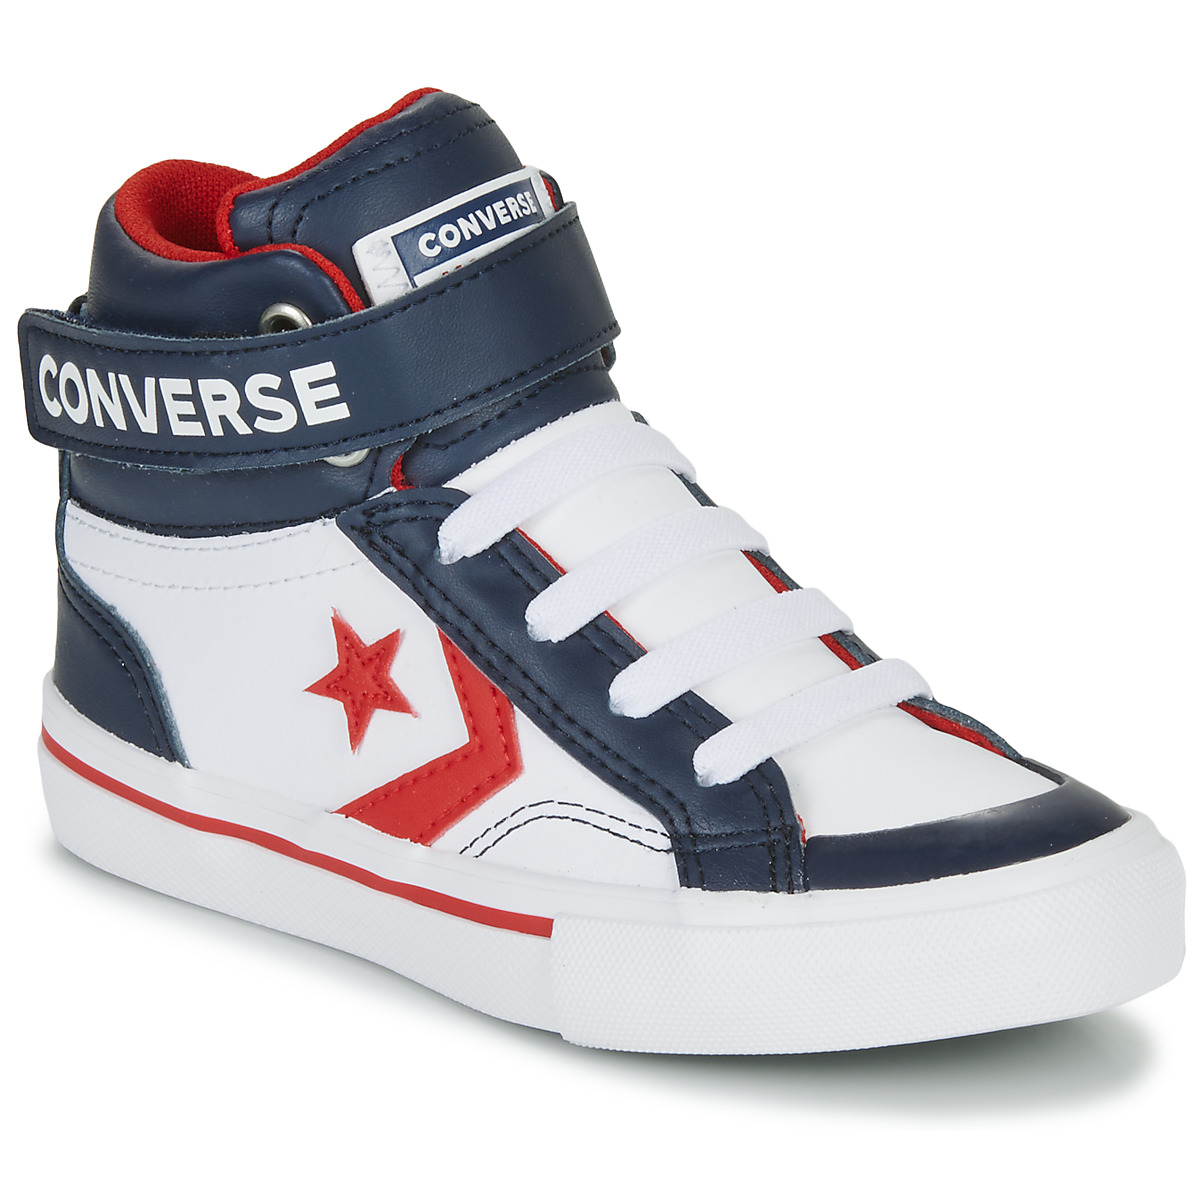 Converse Pro Blaze Strap Hi White / Blue - Fast delivery | Spartoo Europe !  - Shoes High top trainers Child 48,80 €